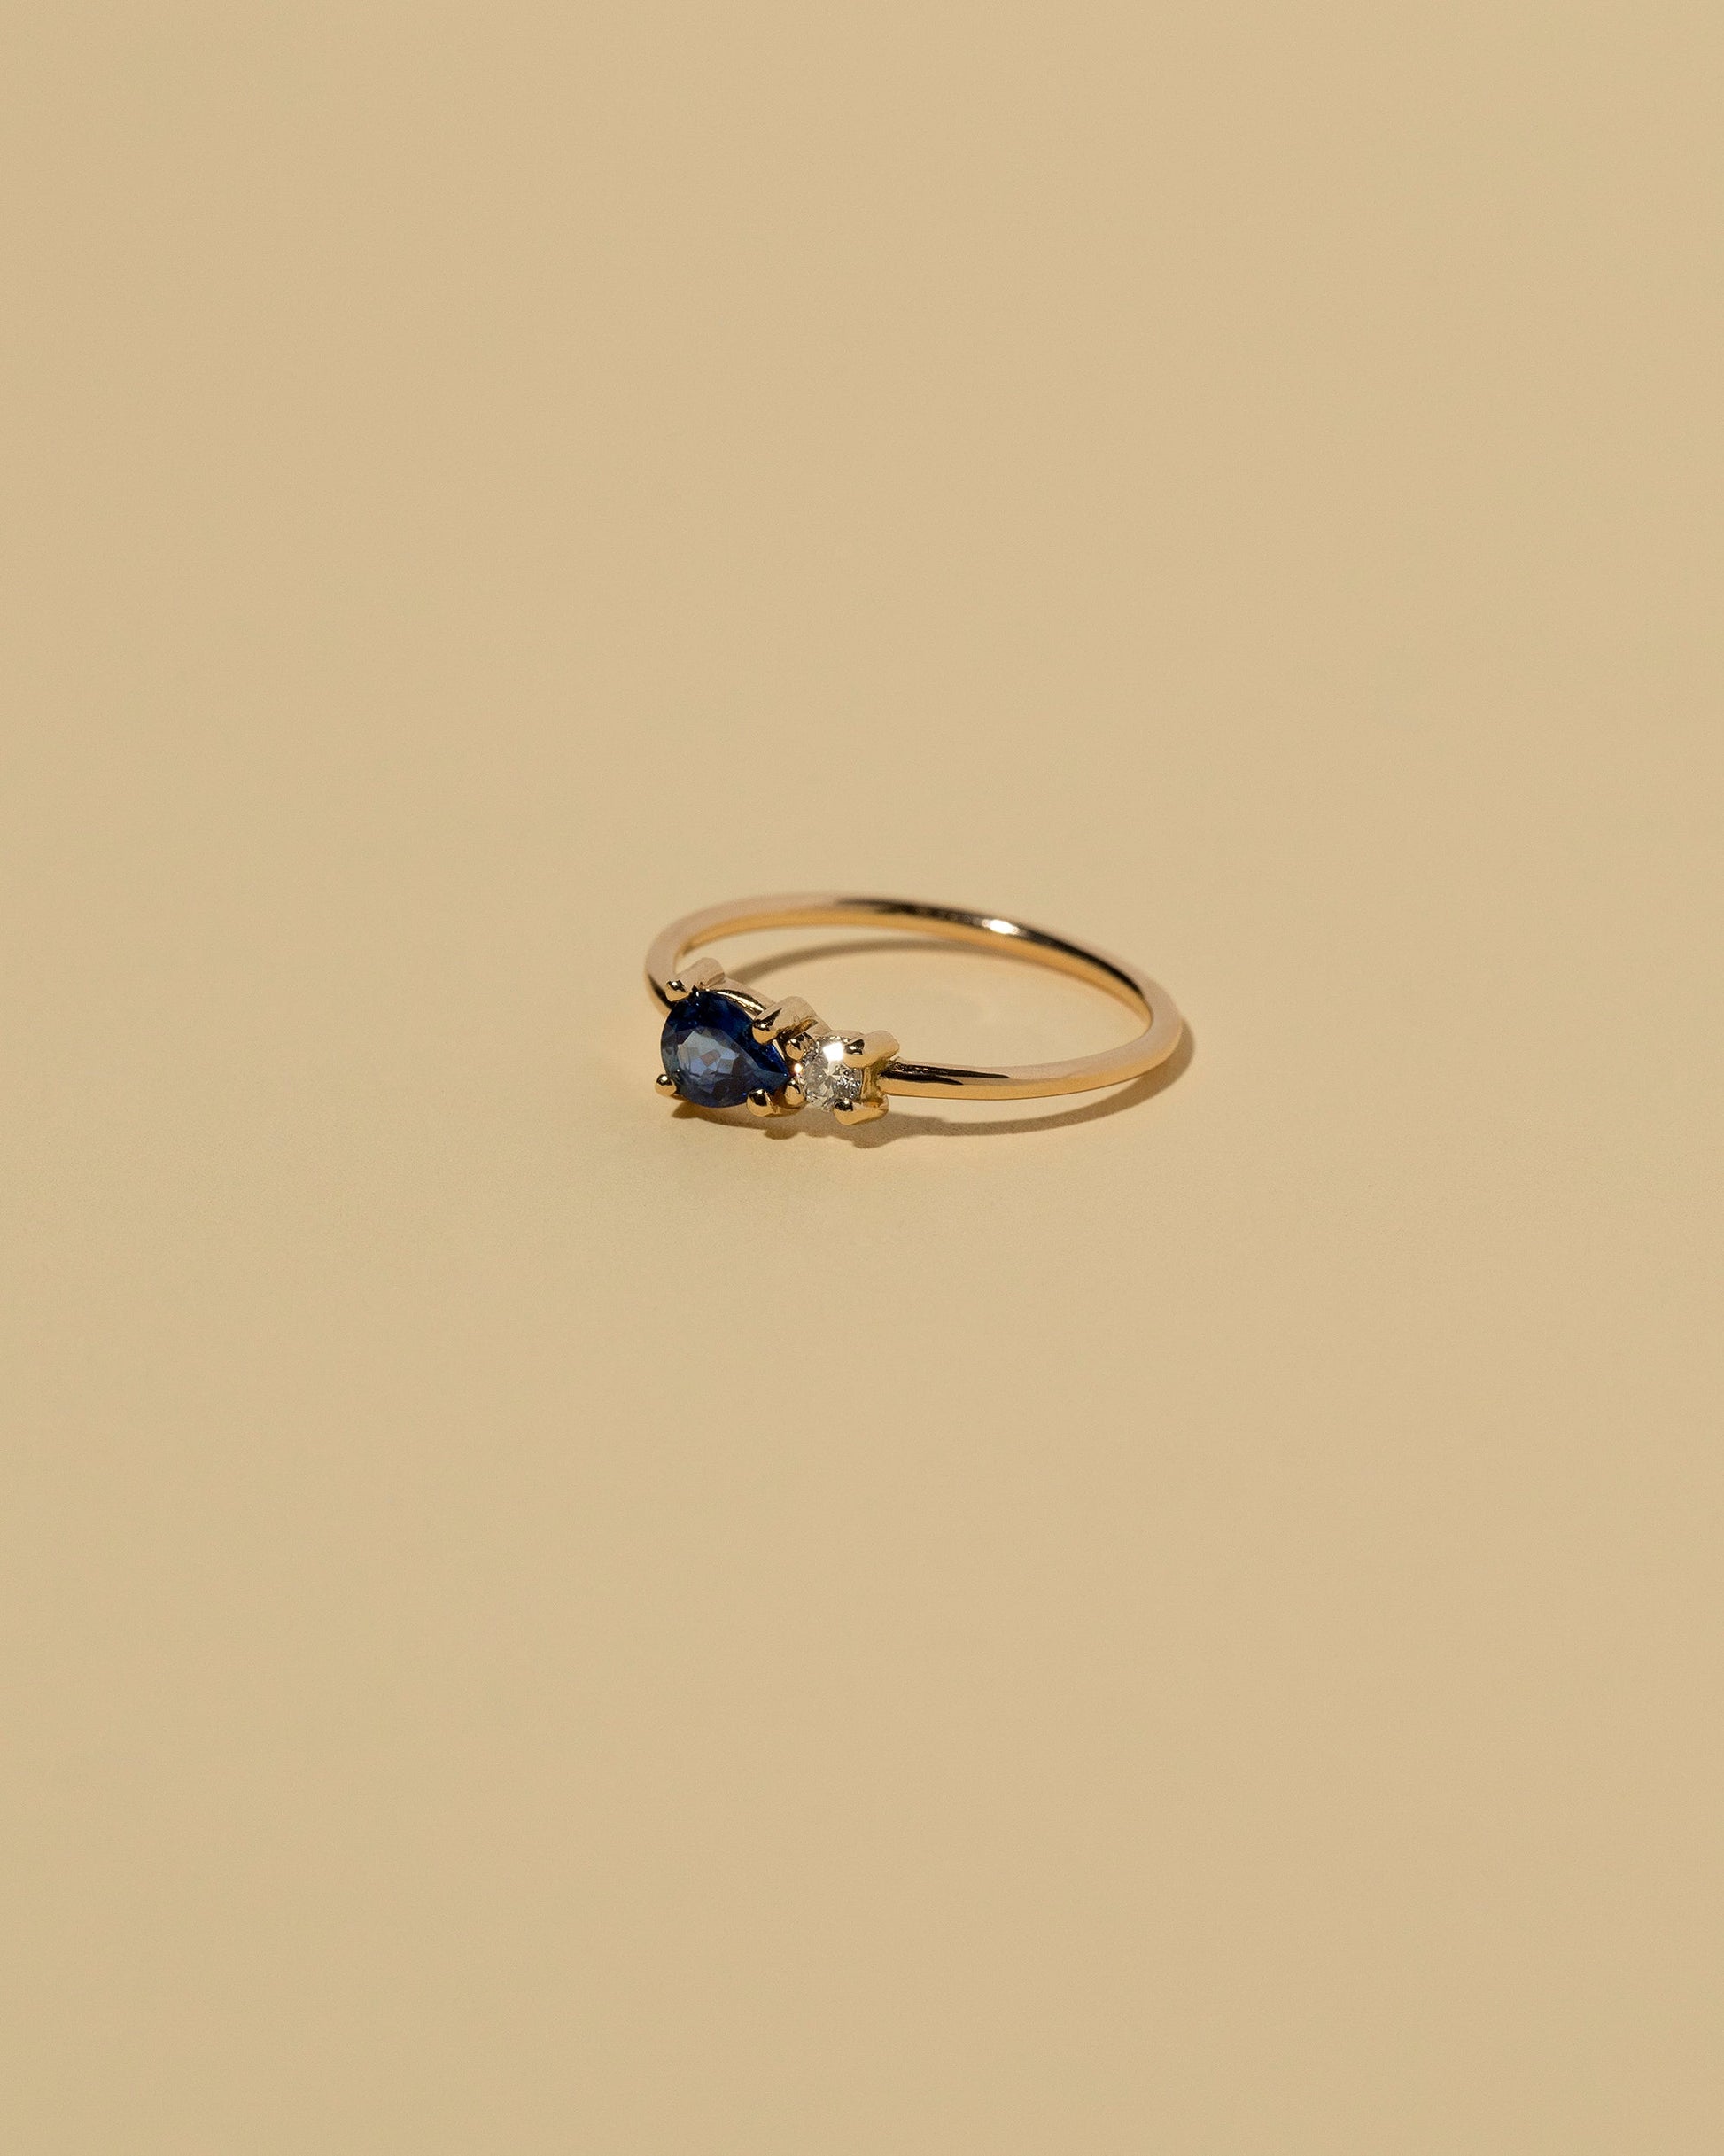 View from the side of the Blue Sapphire Teardrop Ring on light color background.